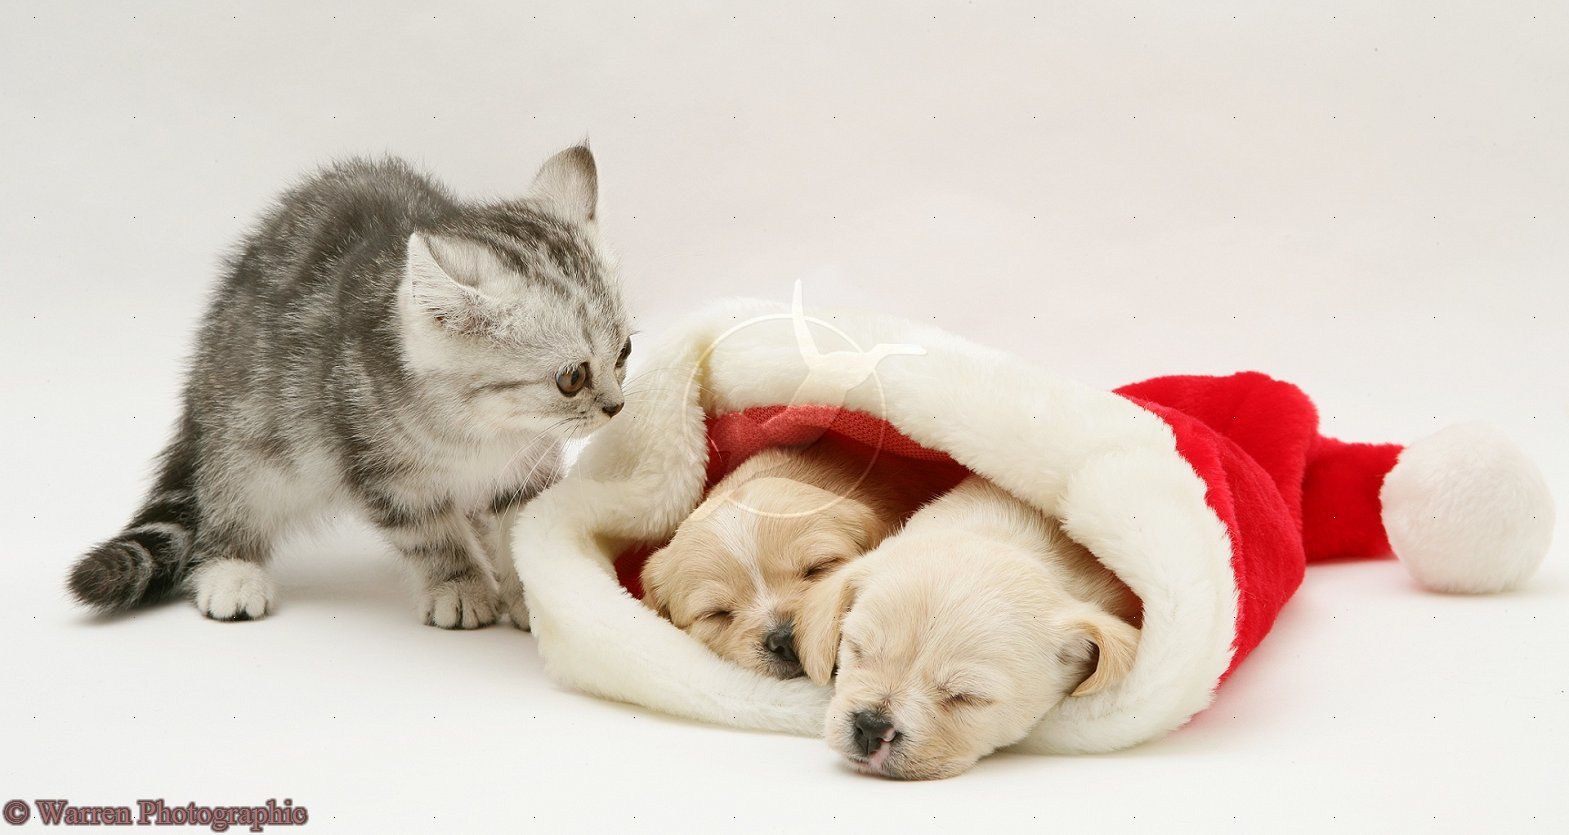 puppies and kittens picture. Cute Christmas Kittens And Puppies 10723 HD Wallpaper in Celebrations. Silver tabby kitten, Christmas kitten, Kittens and puppies